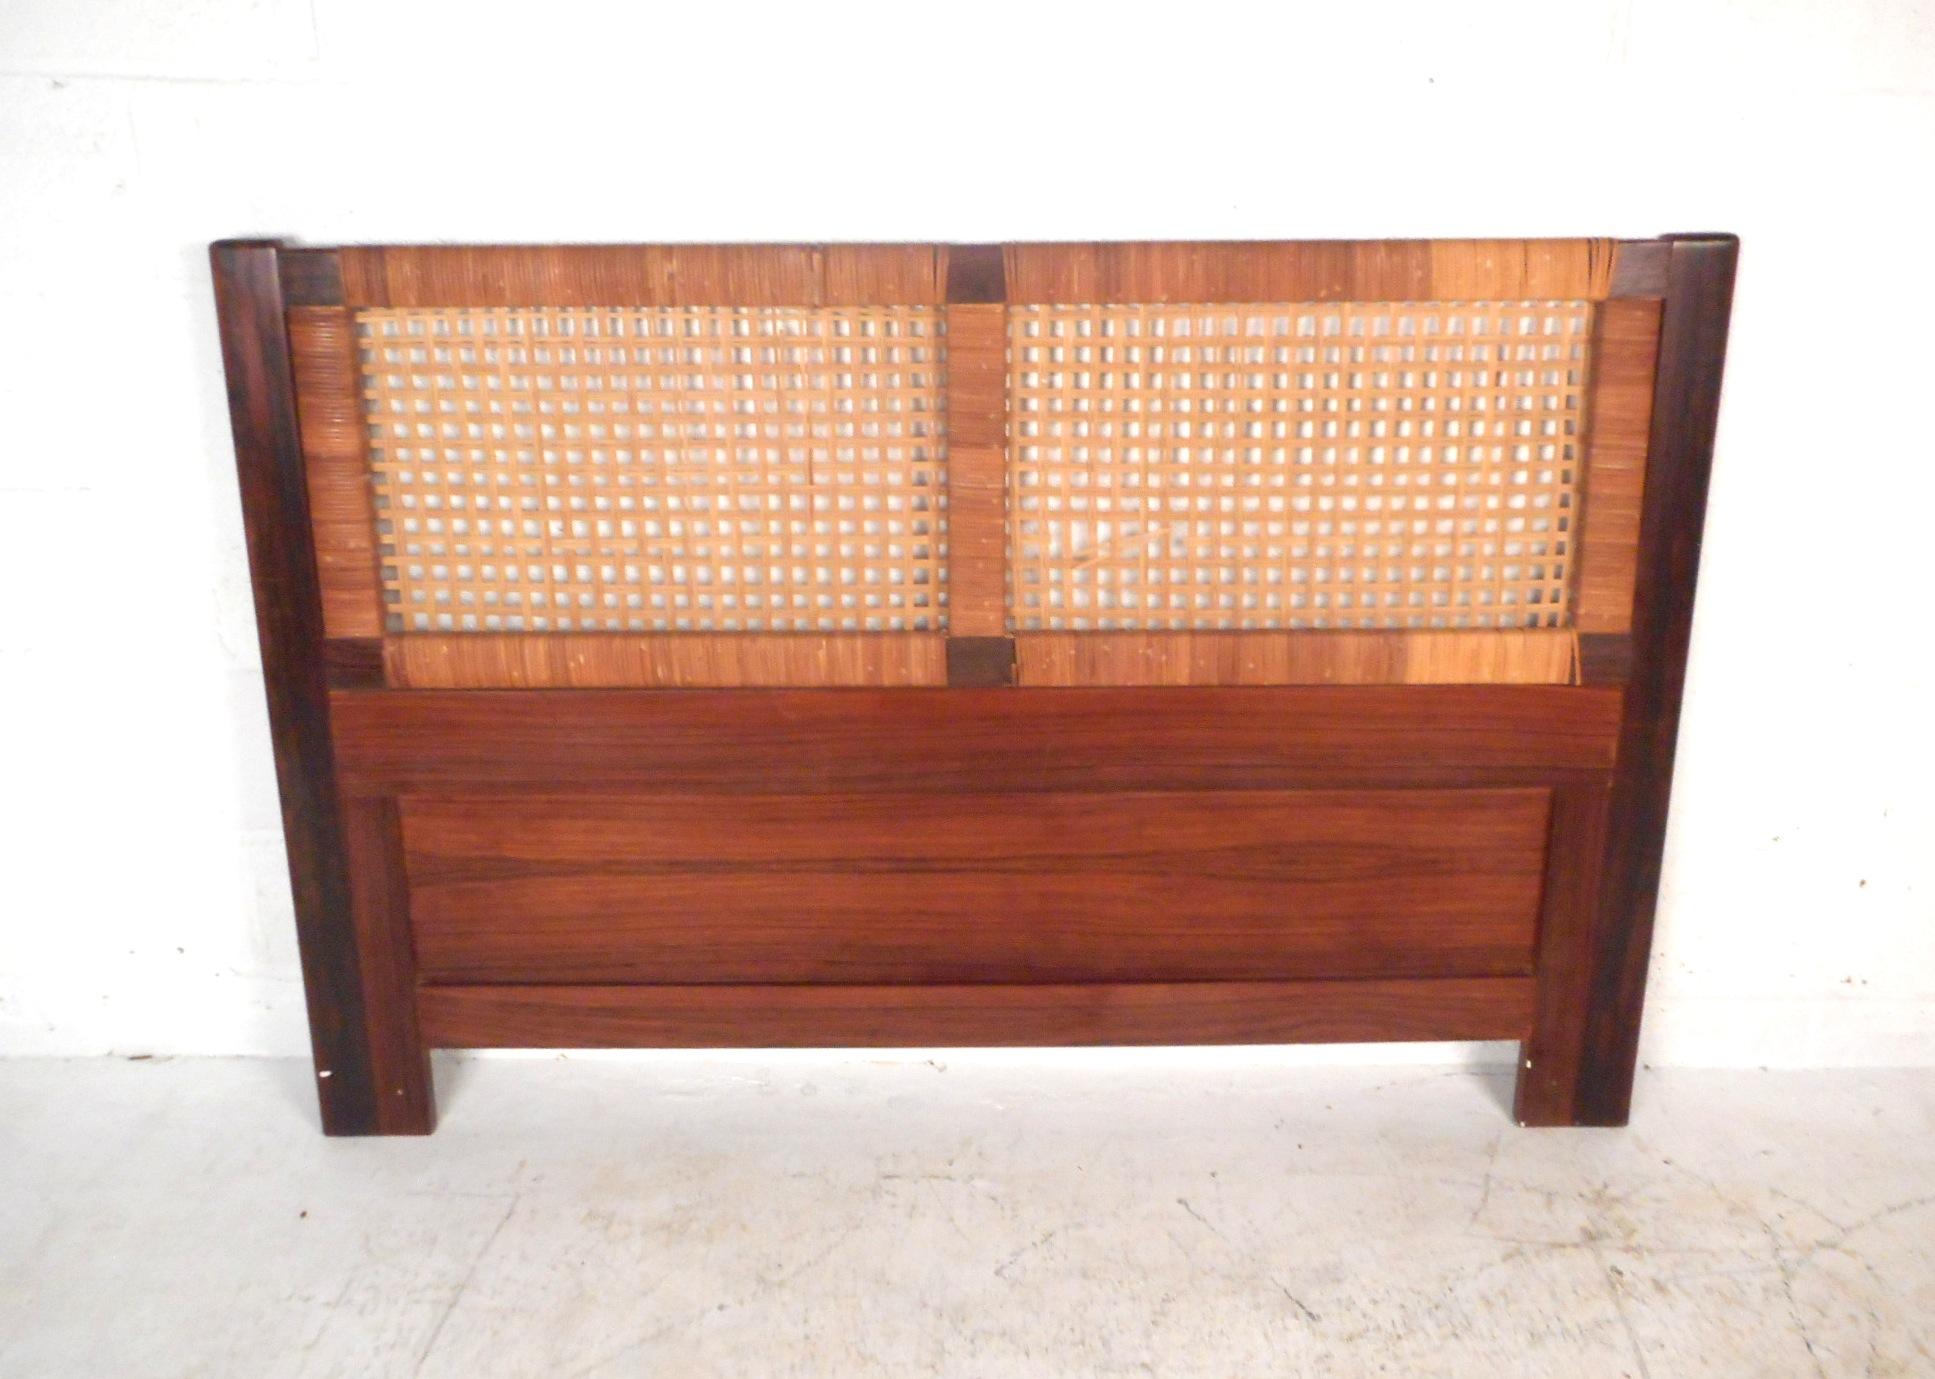 This impressive Danish modern headboard features a rosewood frame and a woven cane centerpiece. This stylish queen sized headboard is sure to compliment any bedroom arrangement. Please confirm item location (NY or NJ).